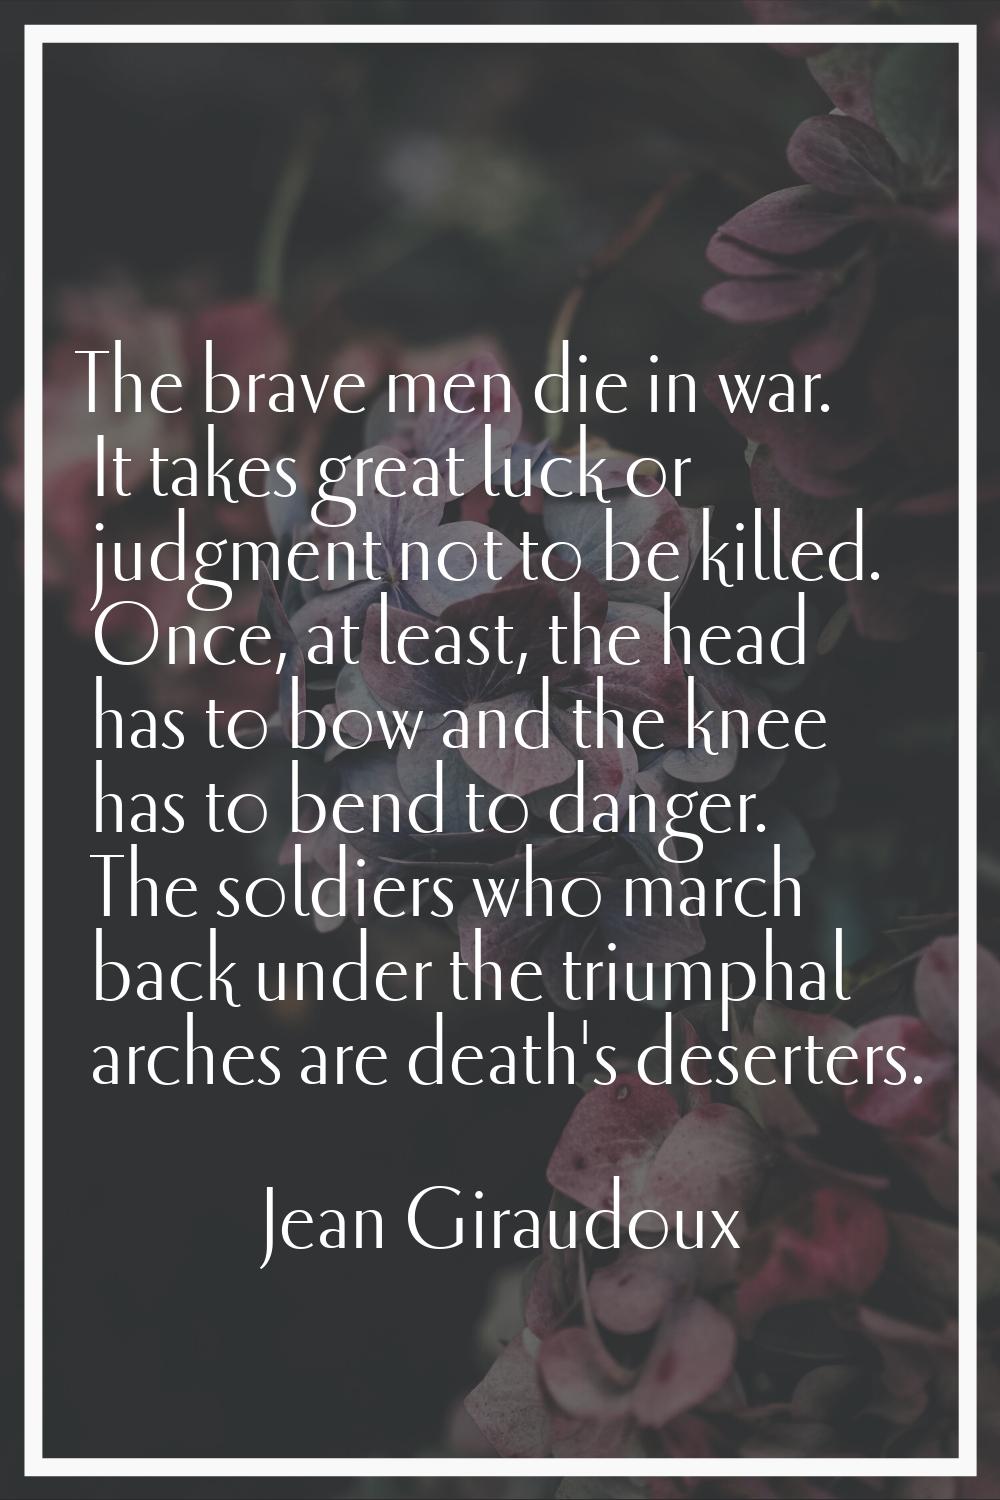 The brave men die in war. It takes great luck or judgment not to be killed. Once, at least, the hea